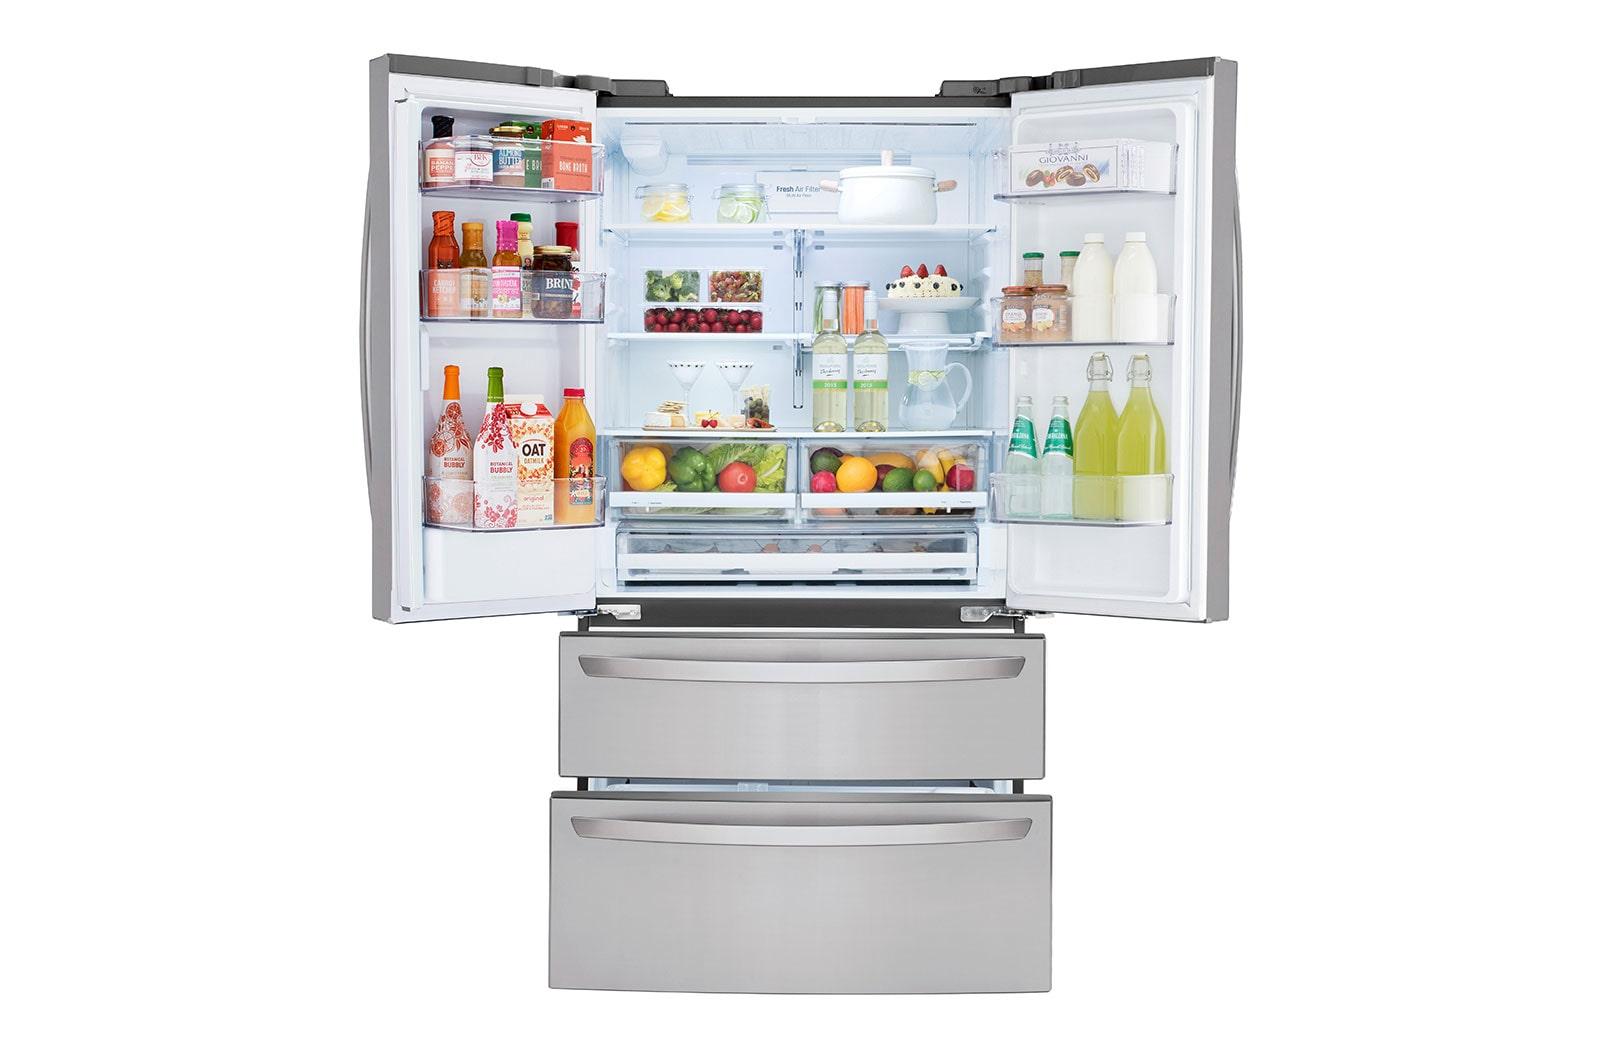 LRMWS2906S by LG - 29 cu. ft. French Door Refrigerator with Slim Design  Water Dispenser